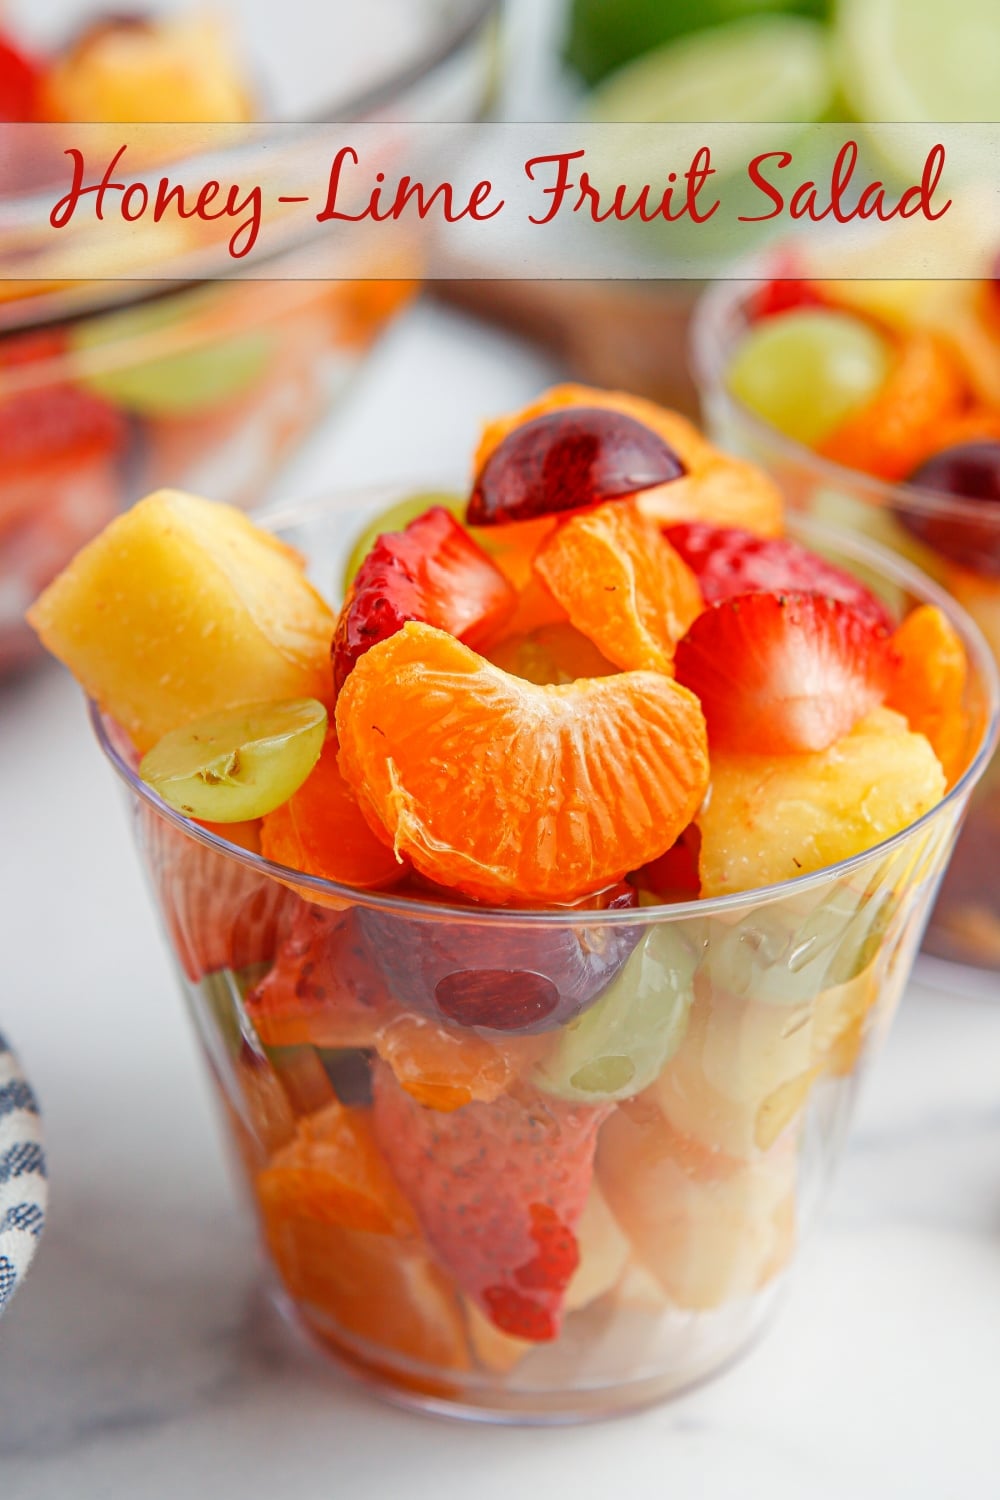 Looking for a refreshing fruit salad idea? Try this vibrant Honey Lime Fruit Salad! It's the perfect summer salad bursting with tropical flavors. Whether you're hosting a party or simply craving a healthy treat, this fruit salad is a must-have. Get ready to impress your guests with this colorful and delicious creation! via @cmpollak1